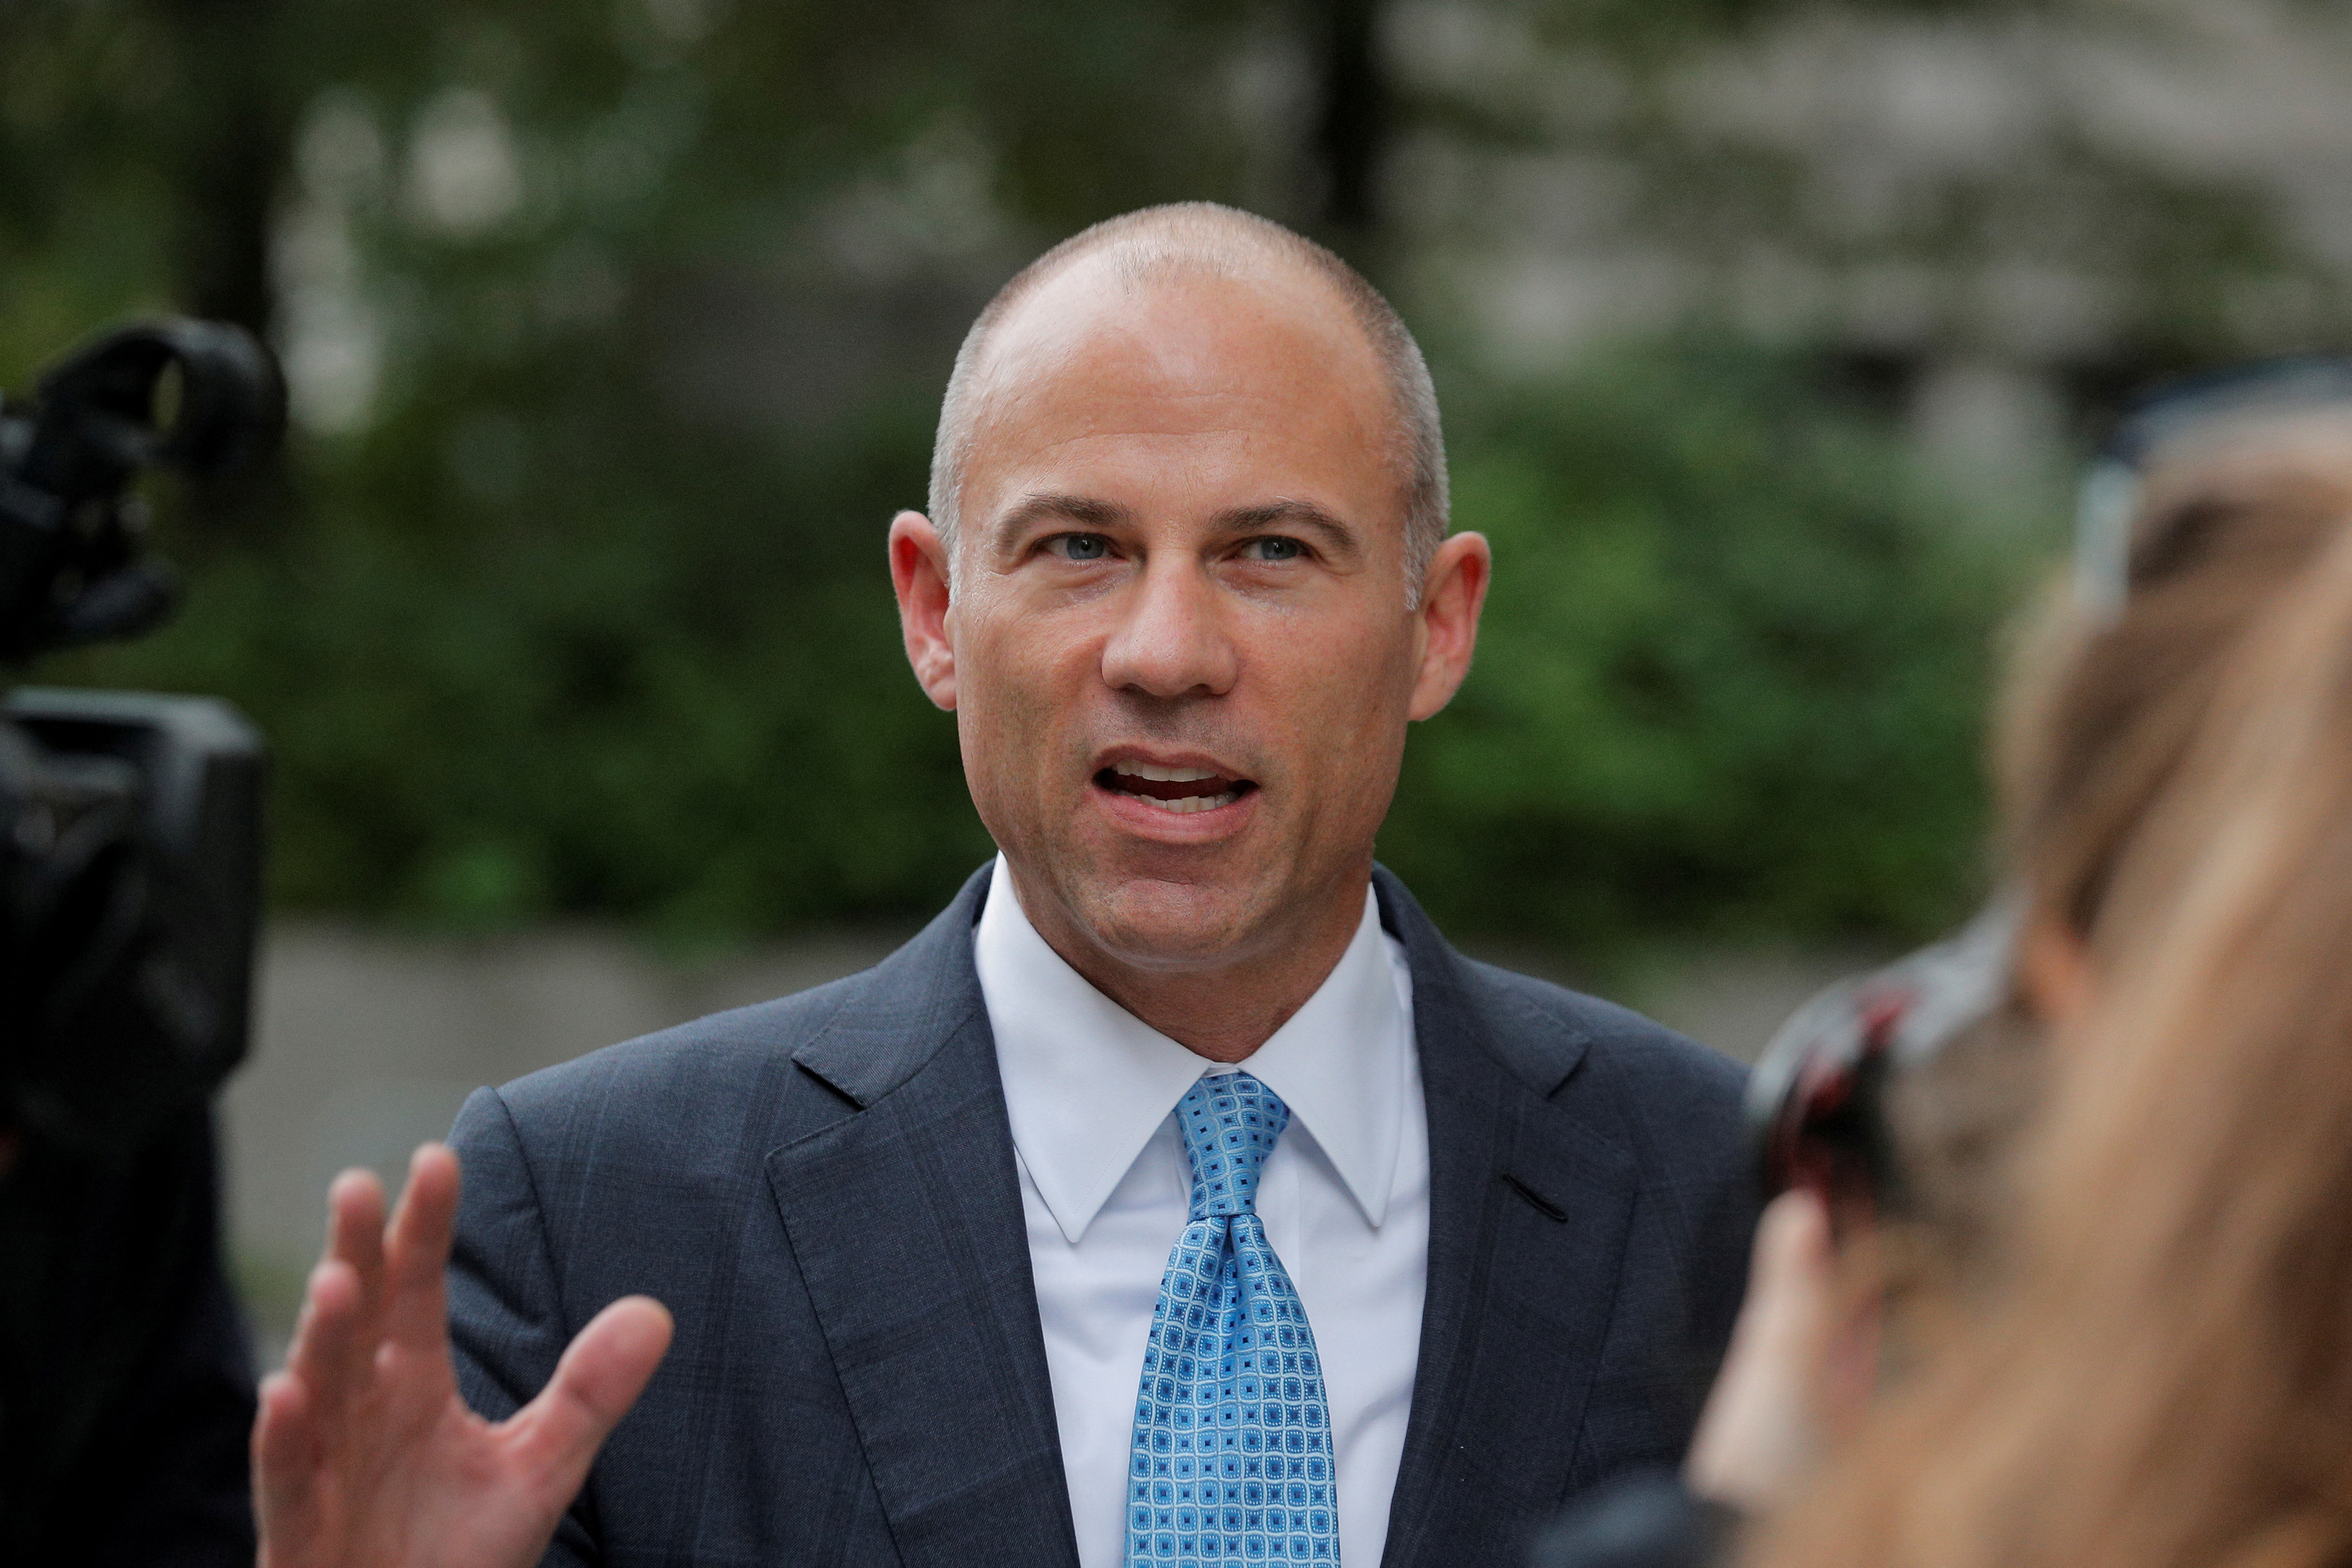 Attorney Michael Avenatti exits the United States Courthouse in the Manhattan borough of New York